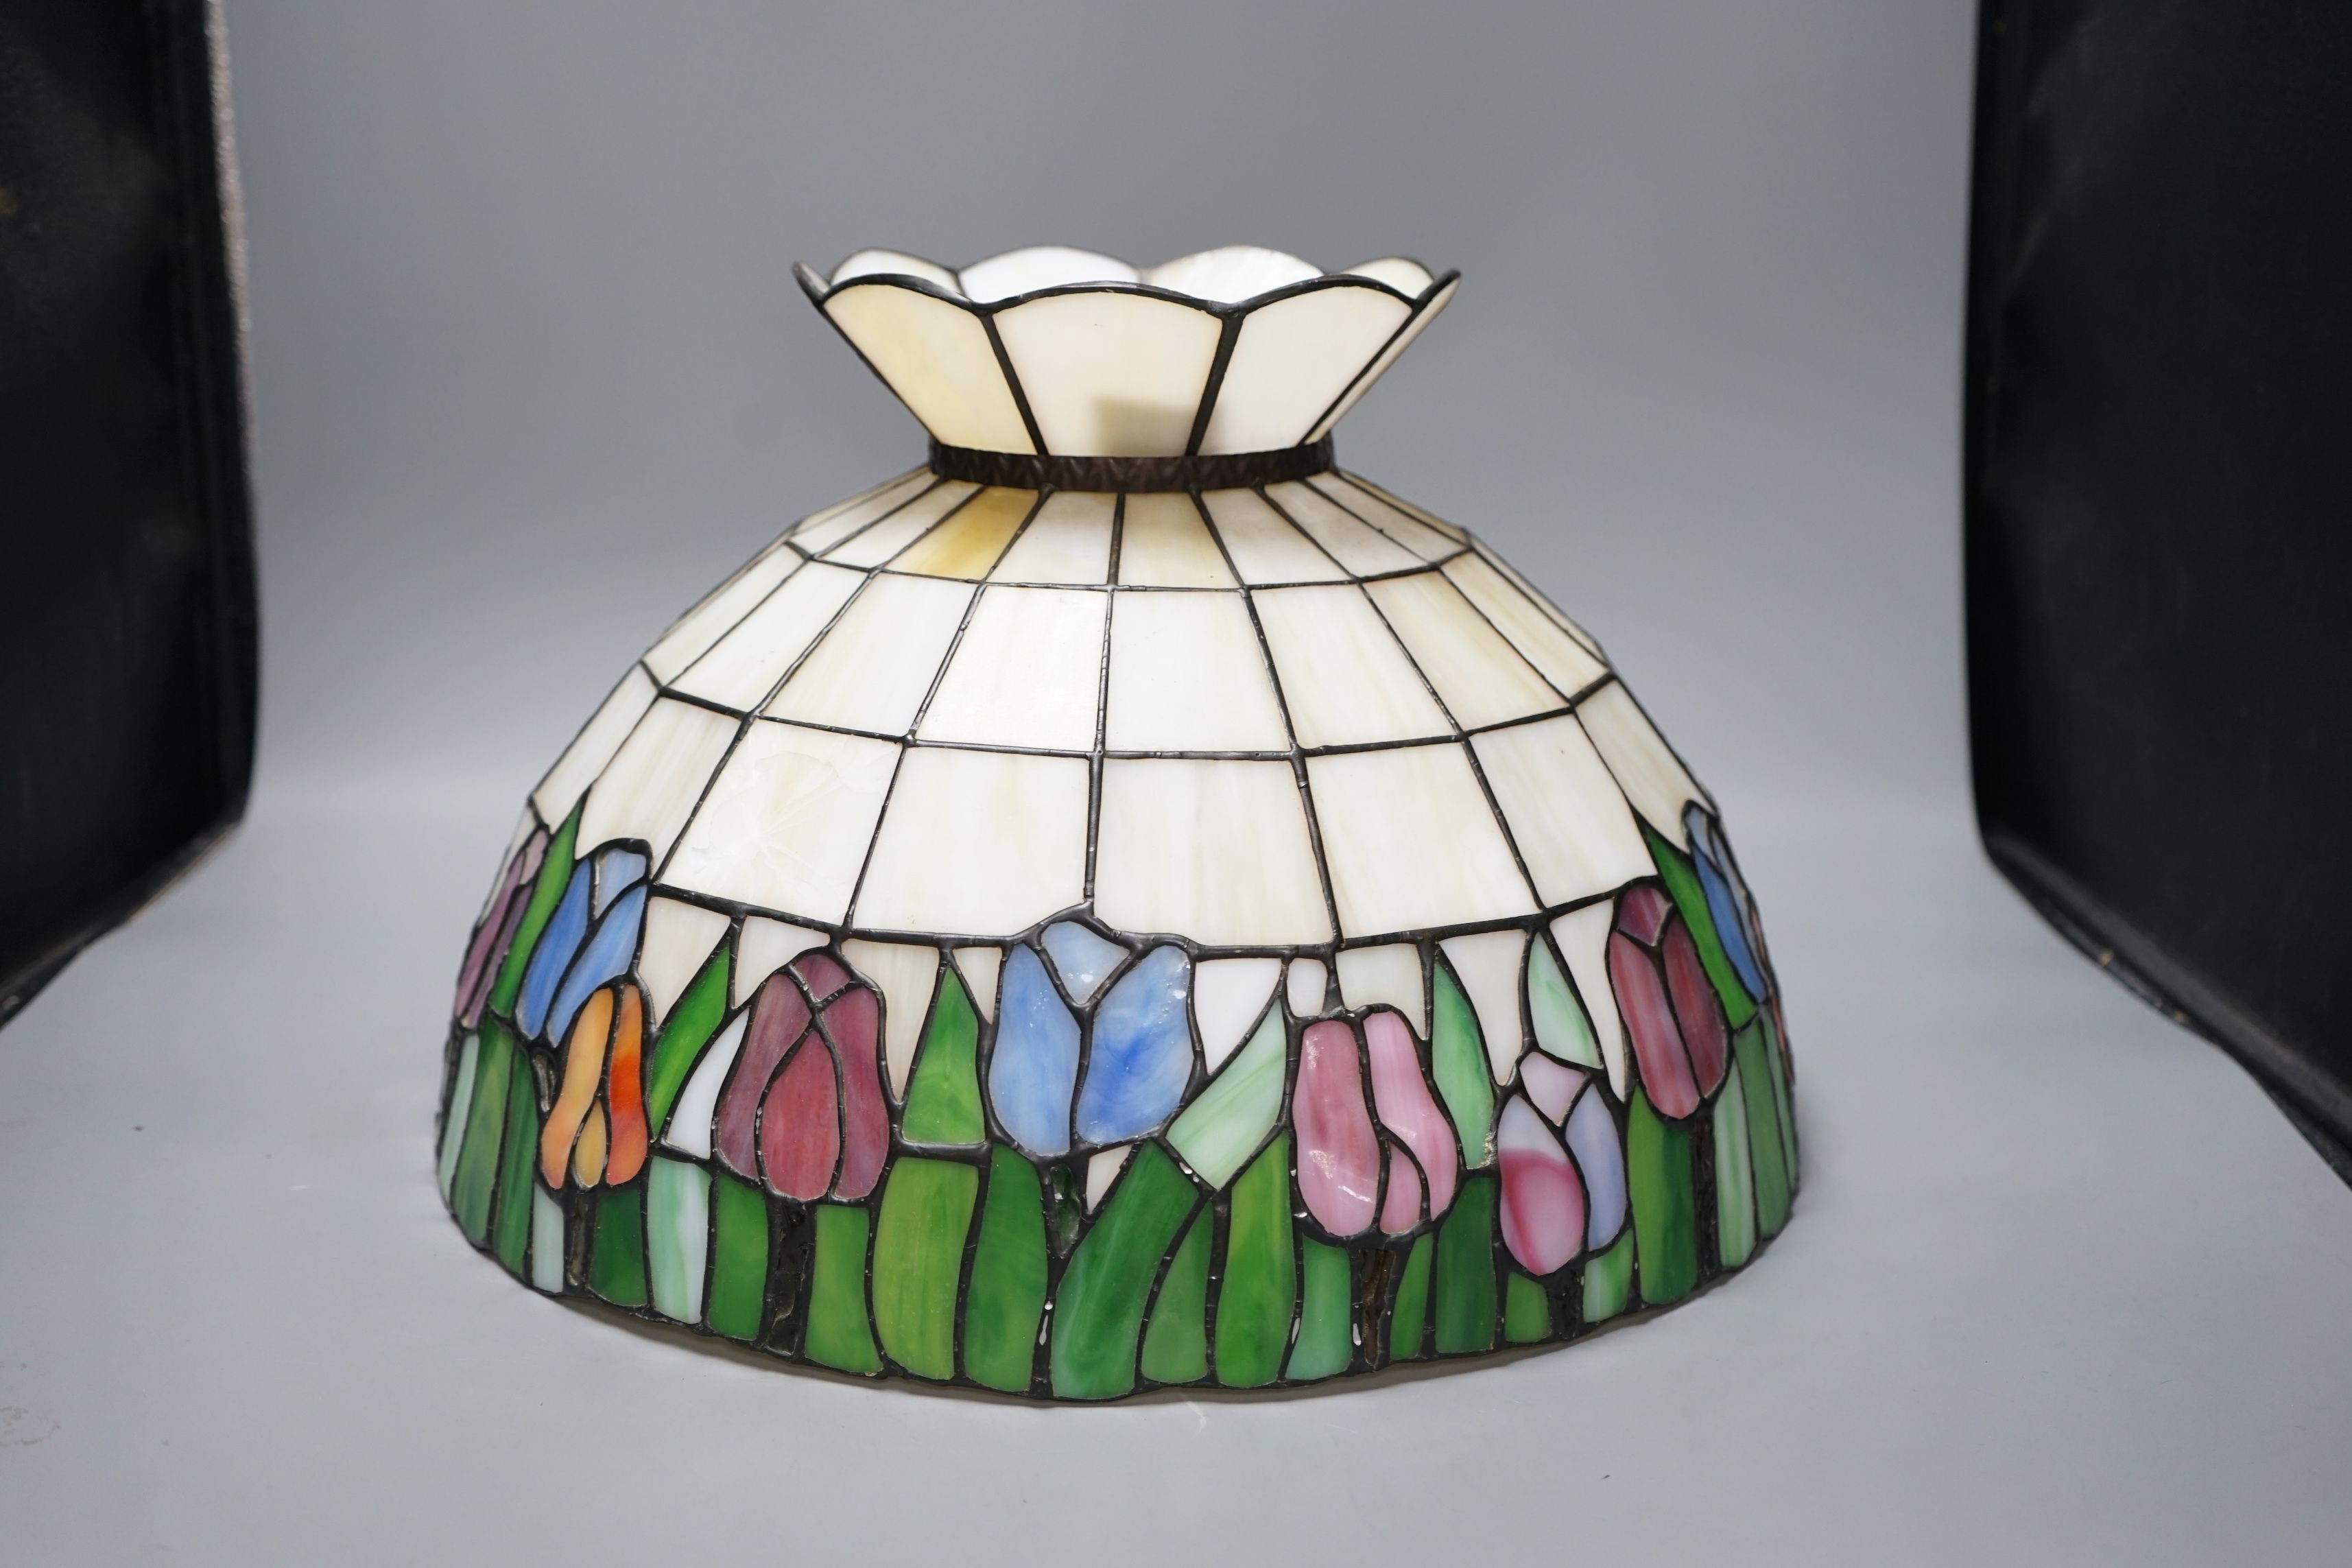 A large Tiffany style glass ceiling shade, 28cms high